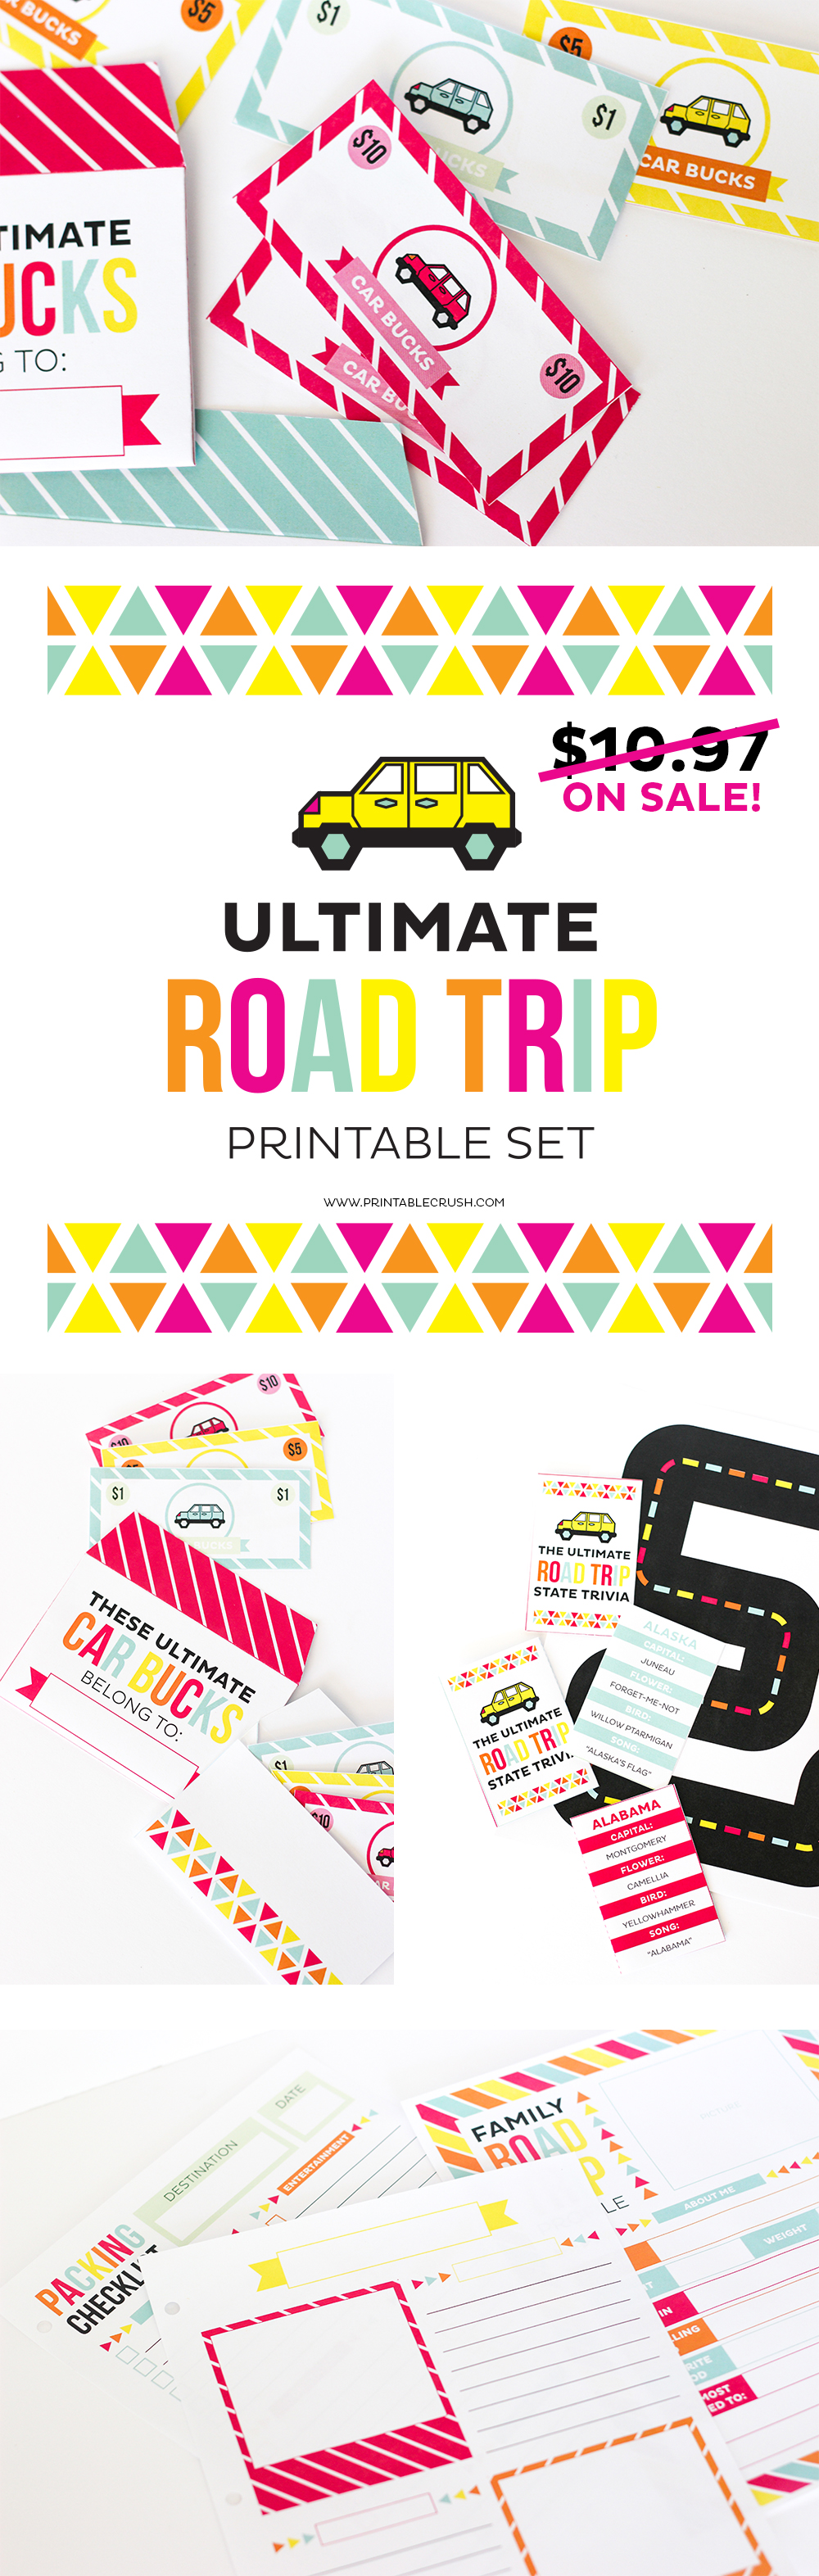 These Road Trip Printables include everything your kids need to prep for your road trip, activities for the car, and pages to keep track of all the memories you make along the way!